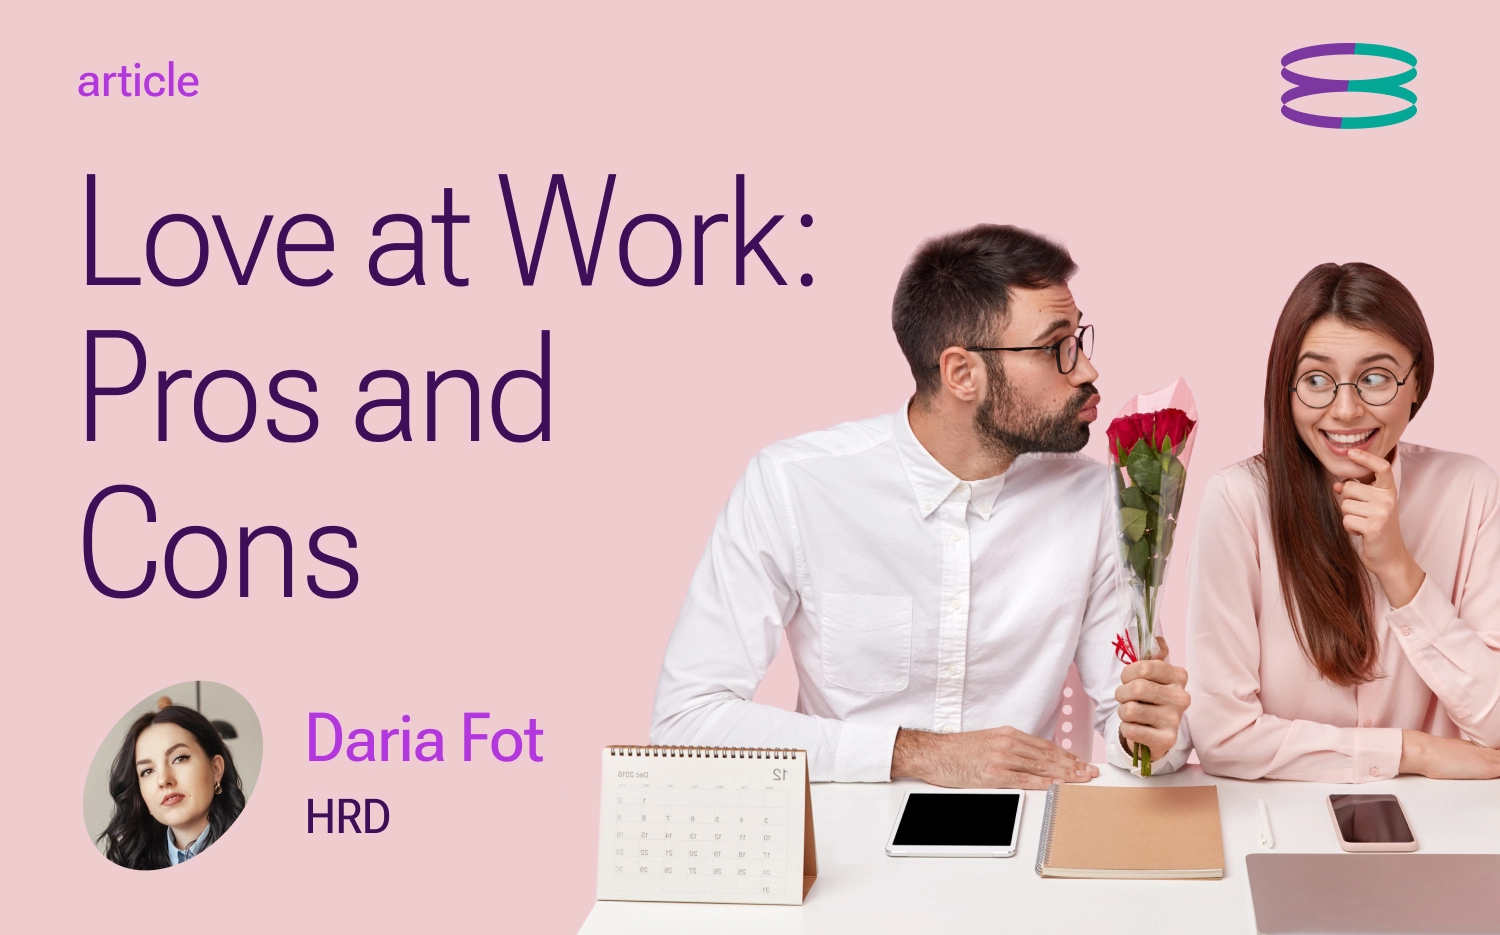 Workplace Romance: Is It Good for Business When Employees Date?